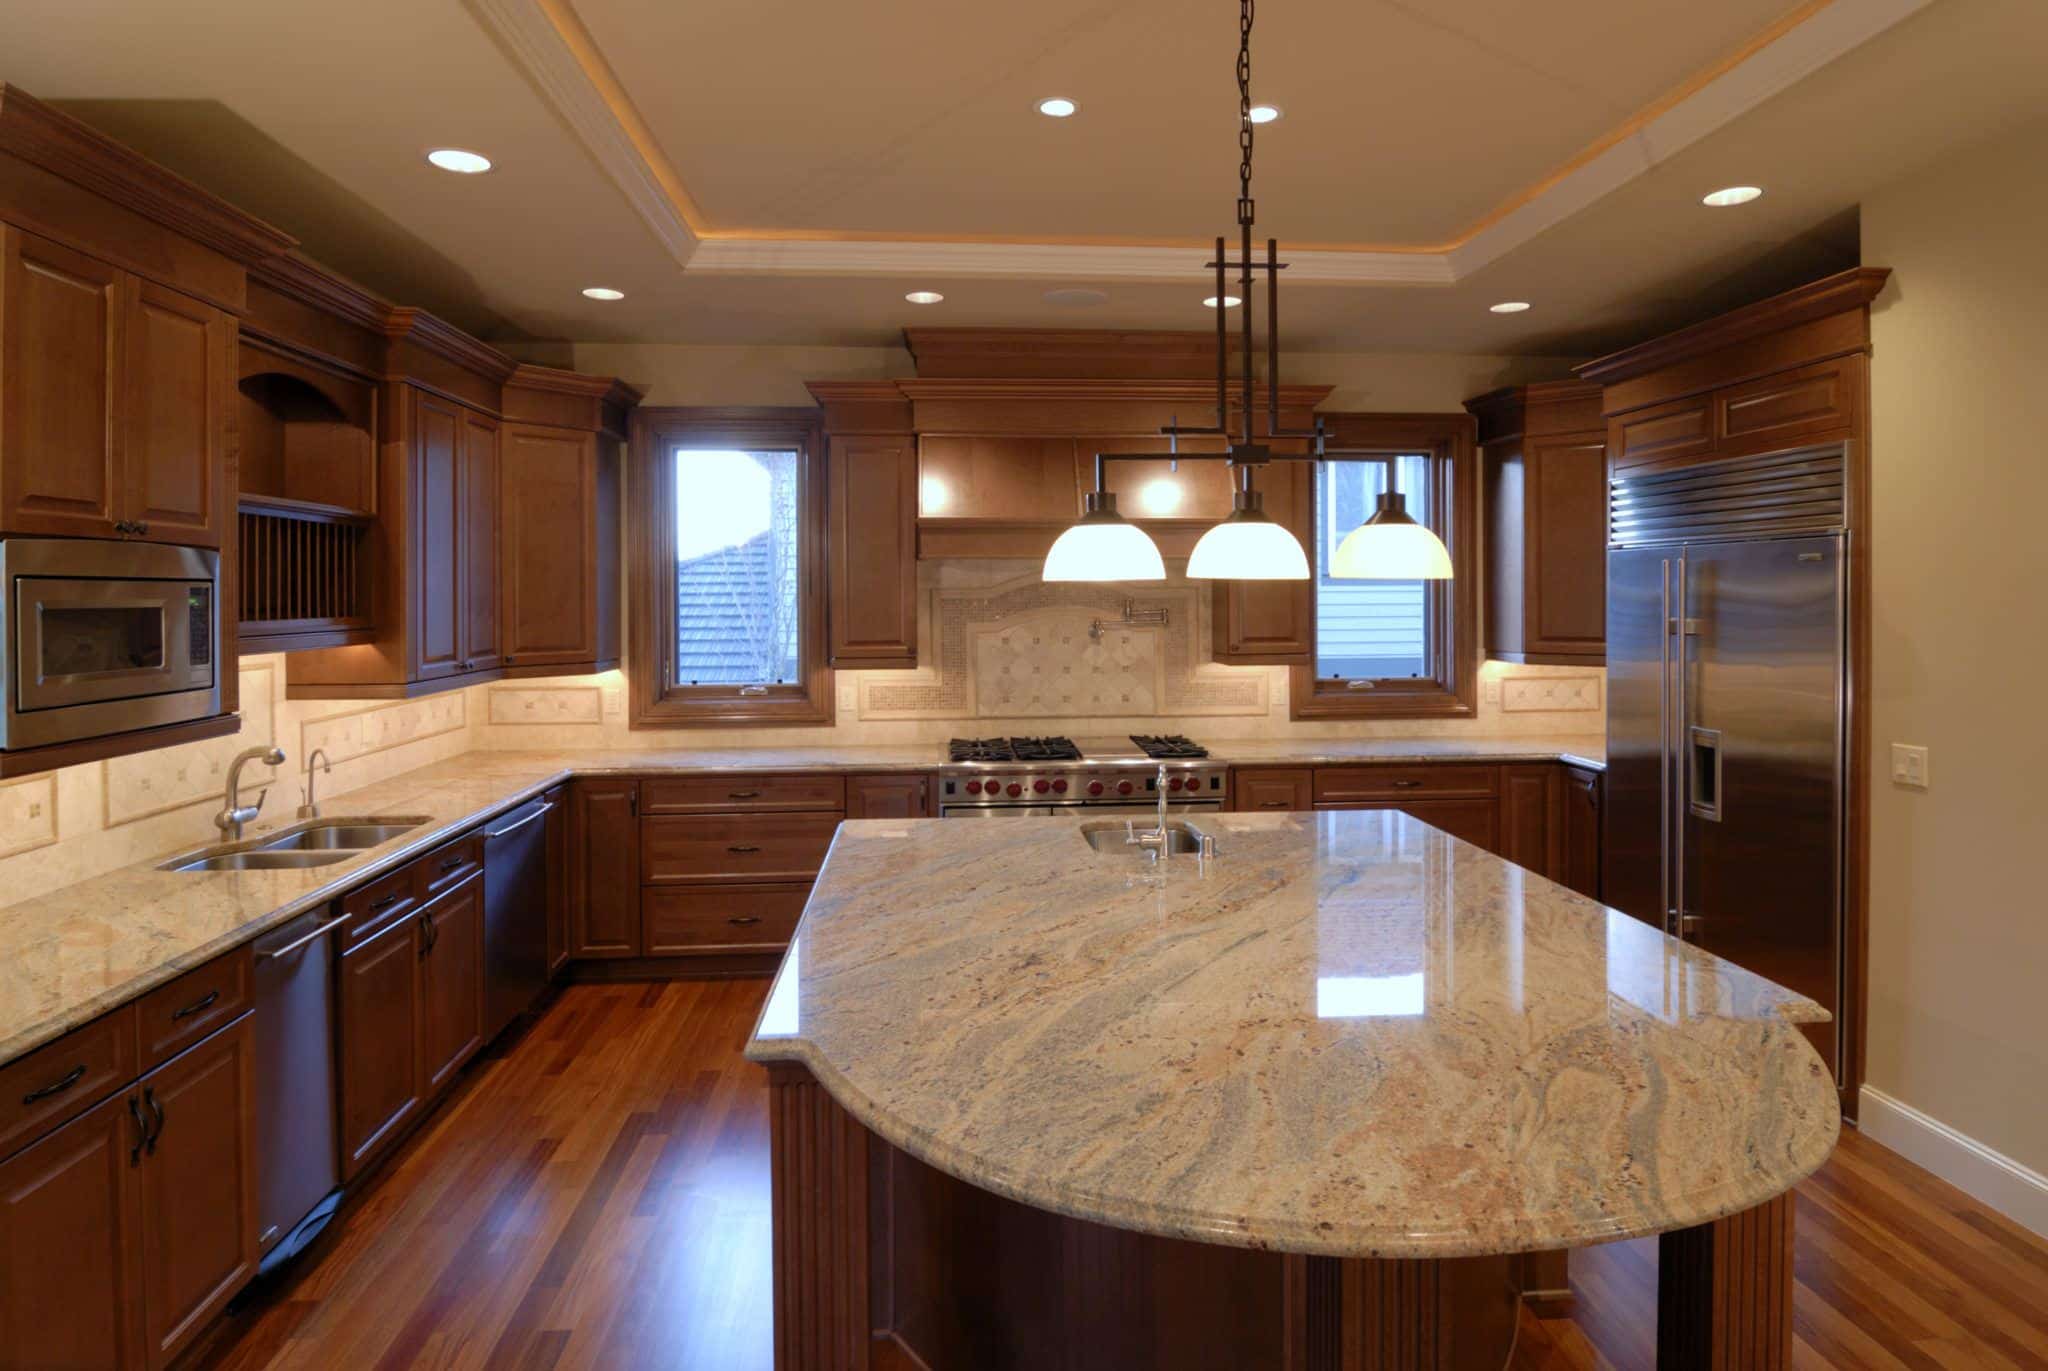 Kitchen Design Tips Only The Pros Know, Kitchen Cabinets Hung Too High